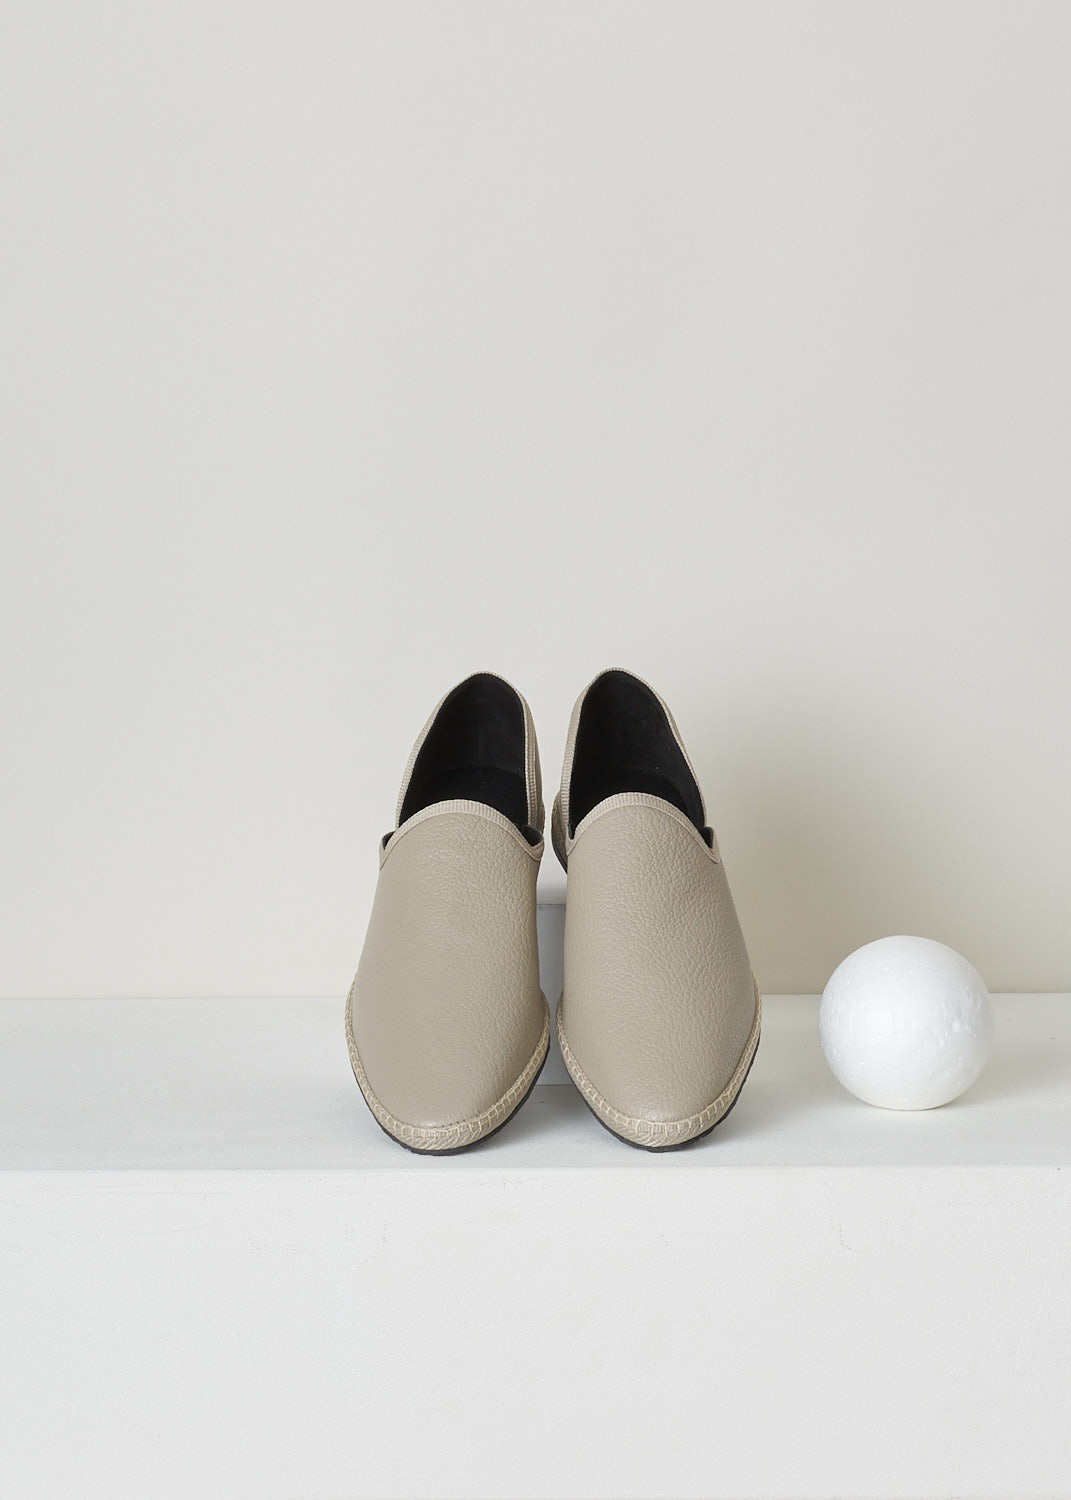 THE ROW, GREY GRAINED LEATHER SLIPPERS, FRIULANE_SLIPPER_NUAGE_F1146A_L36_NUA, Grey, Top, Minimalistic grey colored grain leather slipper. The slip-in model features a rounded toe vamp. 
